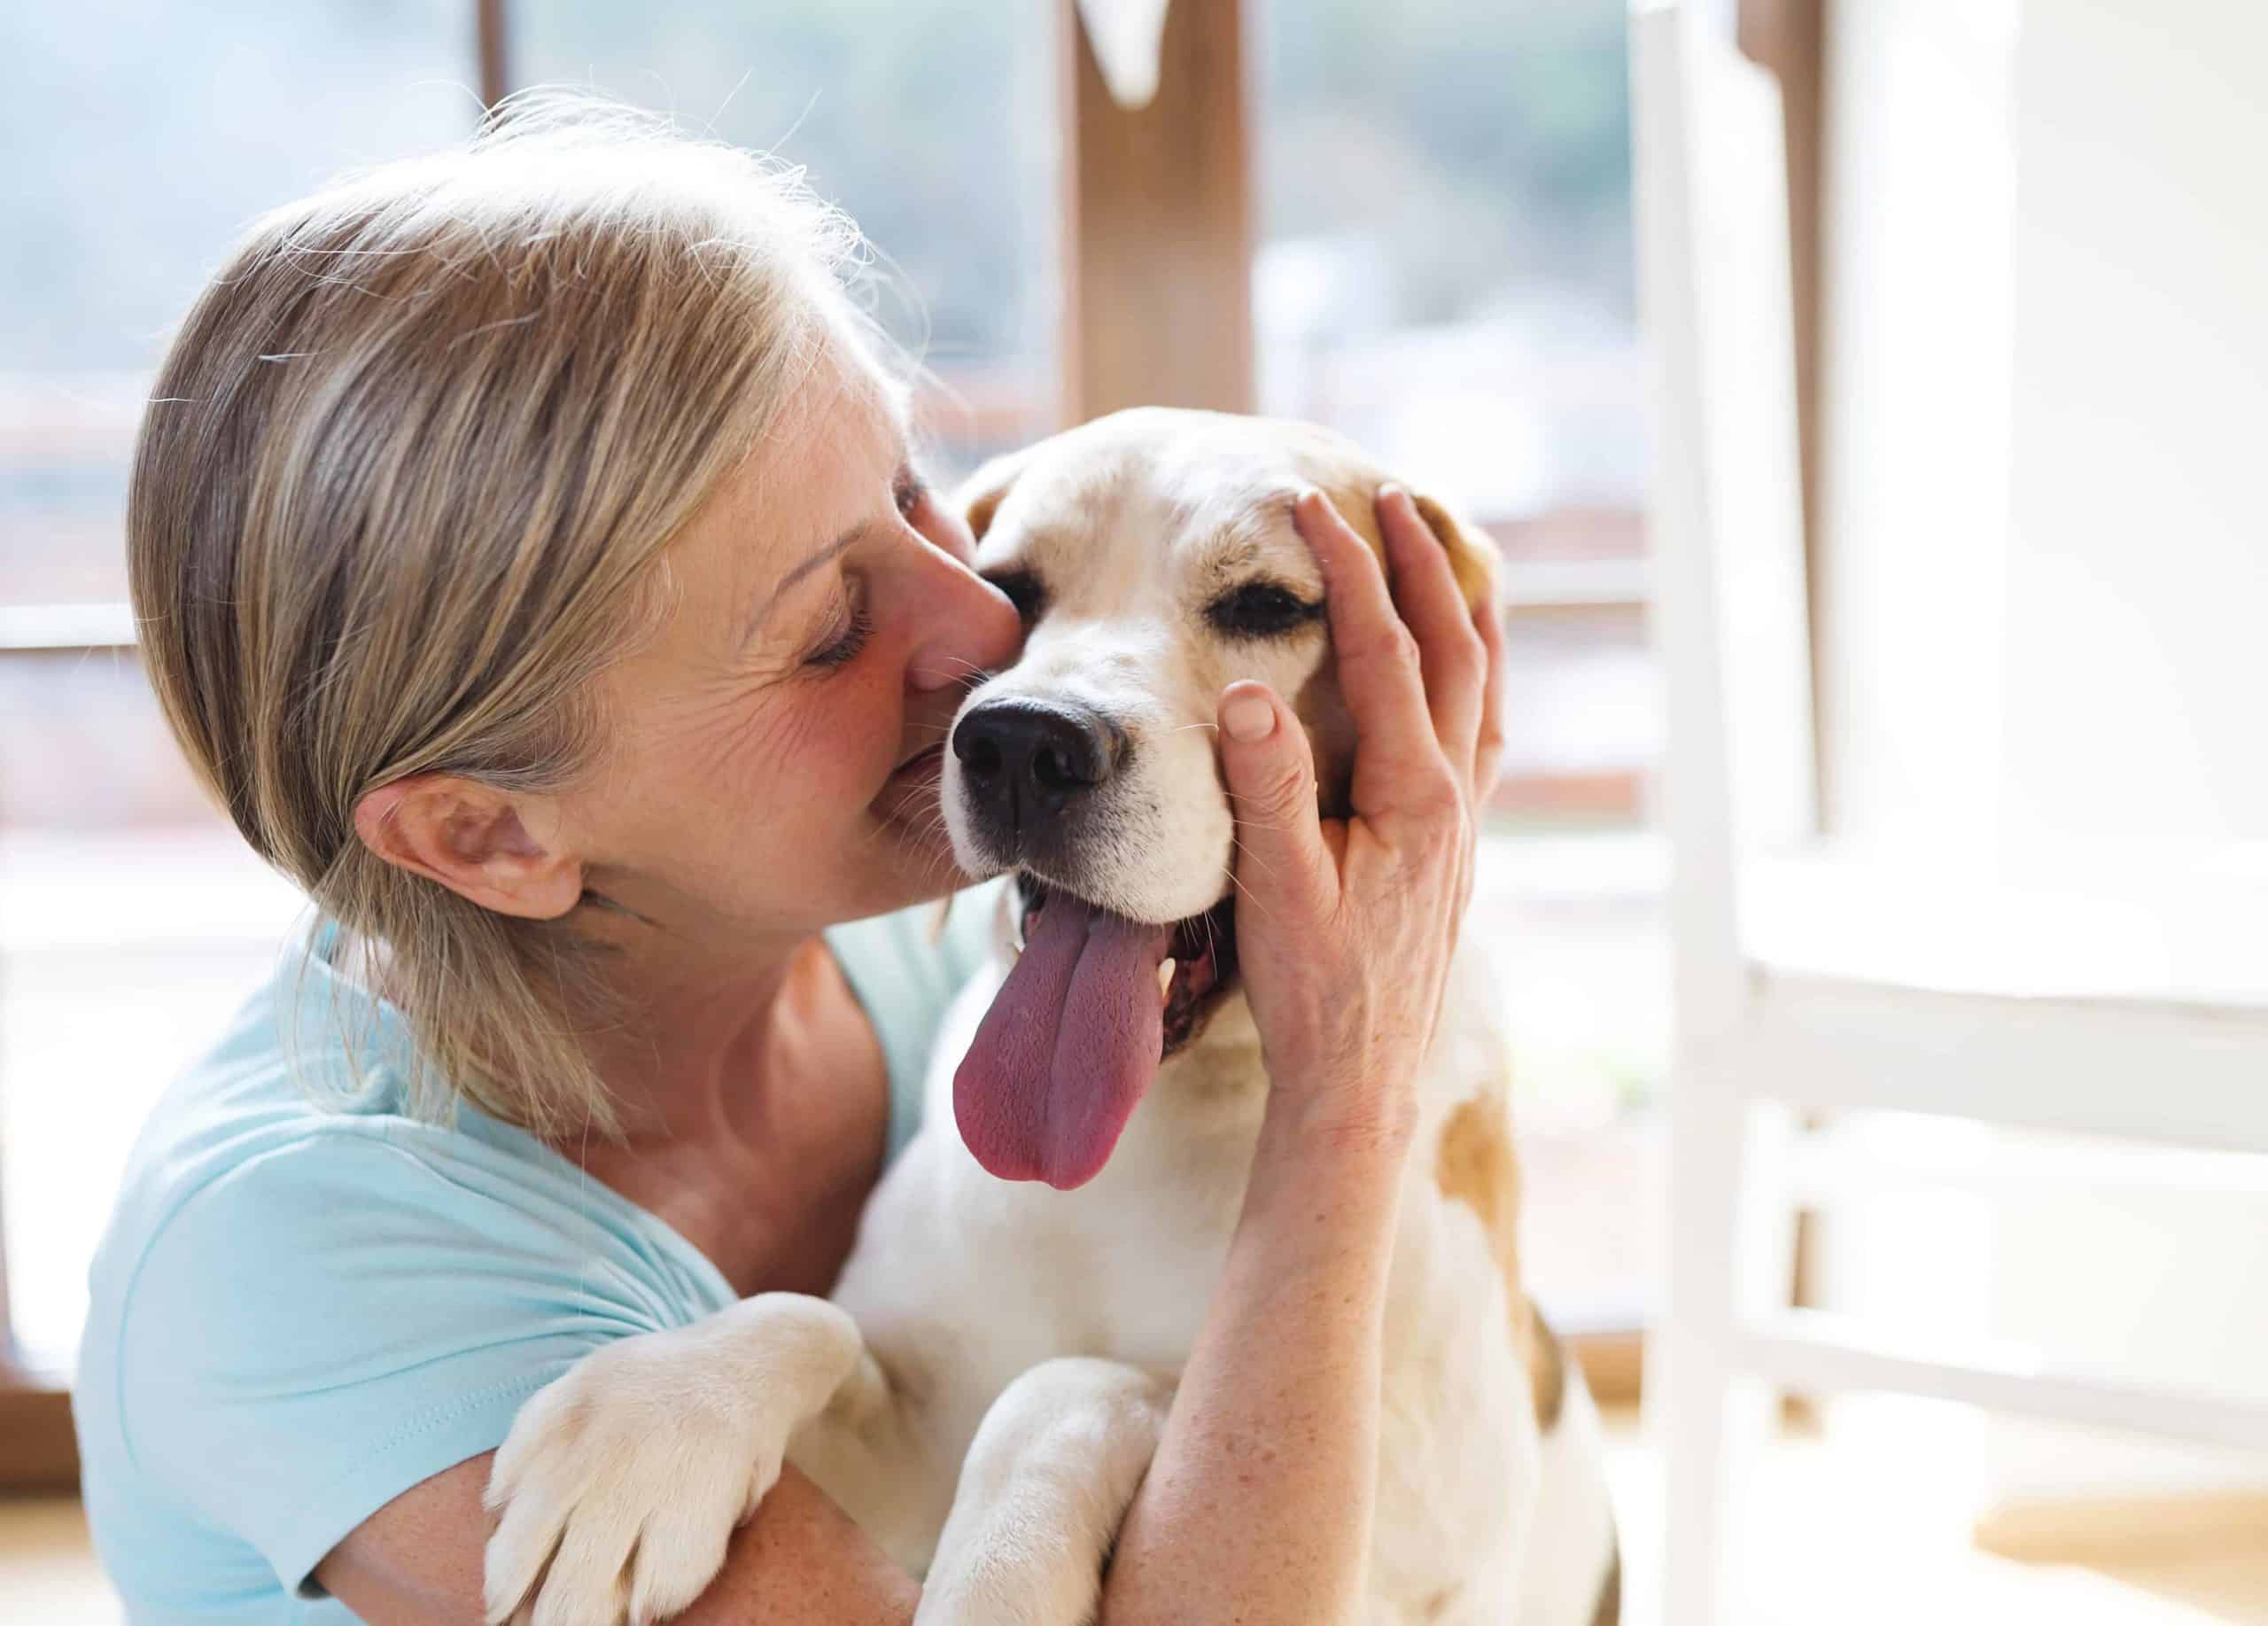 Woman kisses beagle. An ESA letter gives you the legal right to keep your animal in your home, even if your building has a no-pet policy.